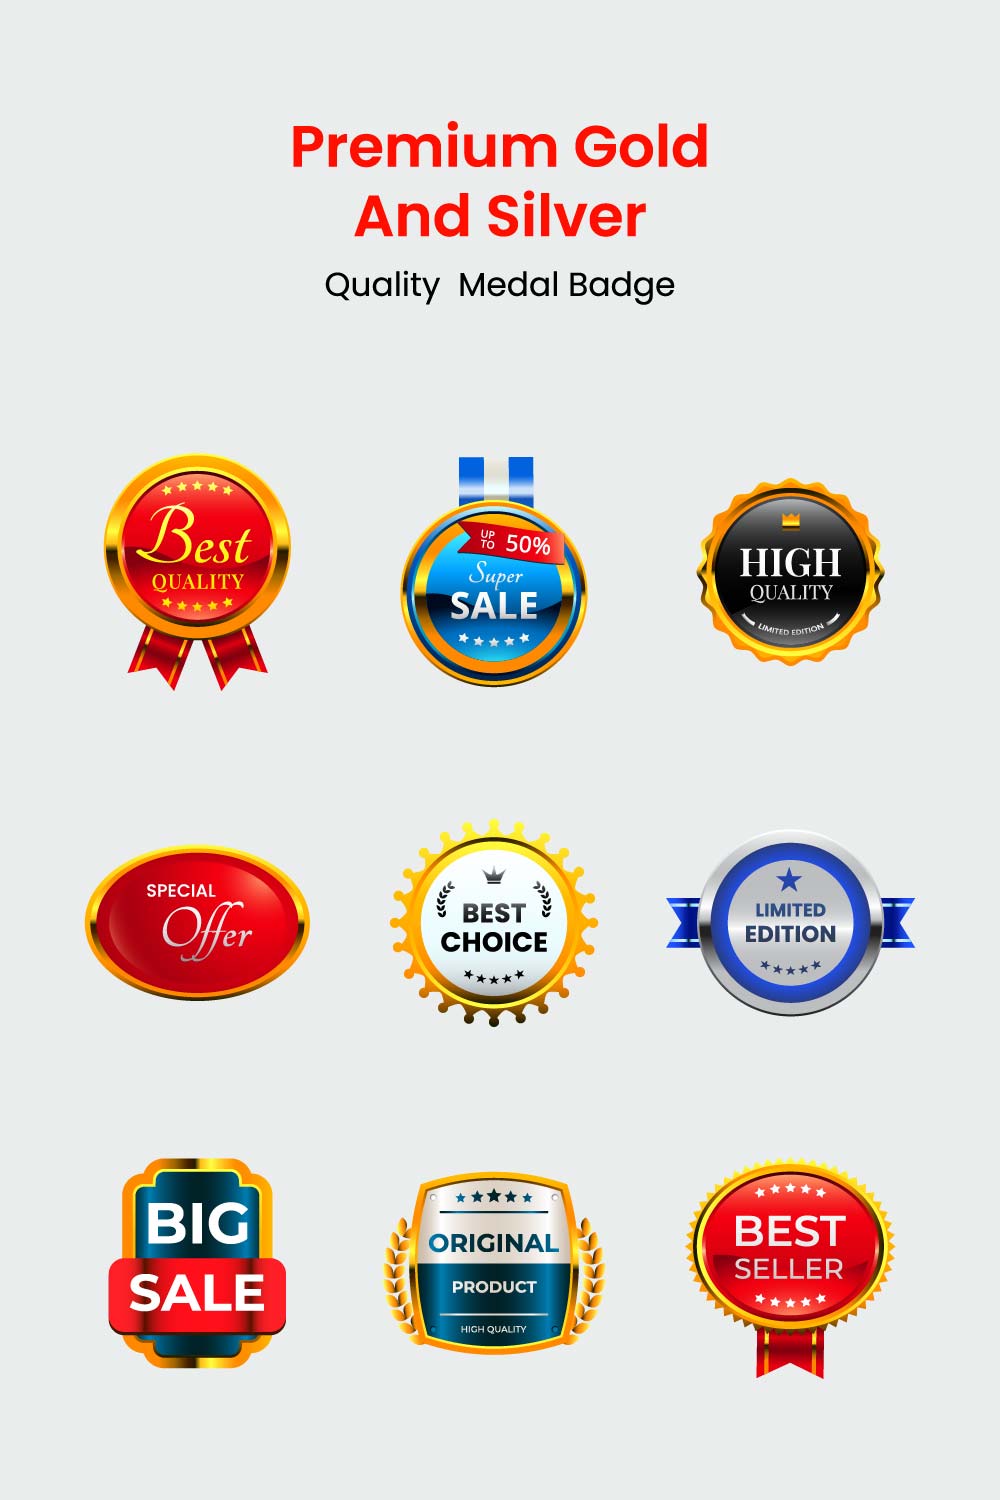 Premium Gold And Silver Quality Medal Badge.